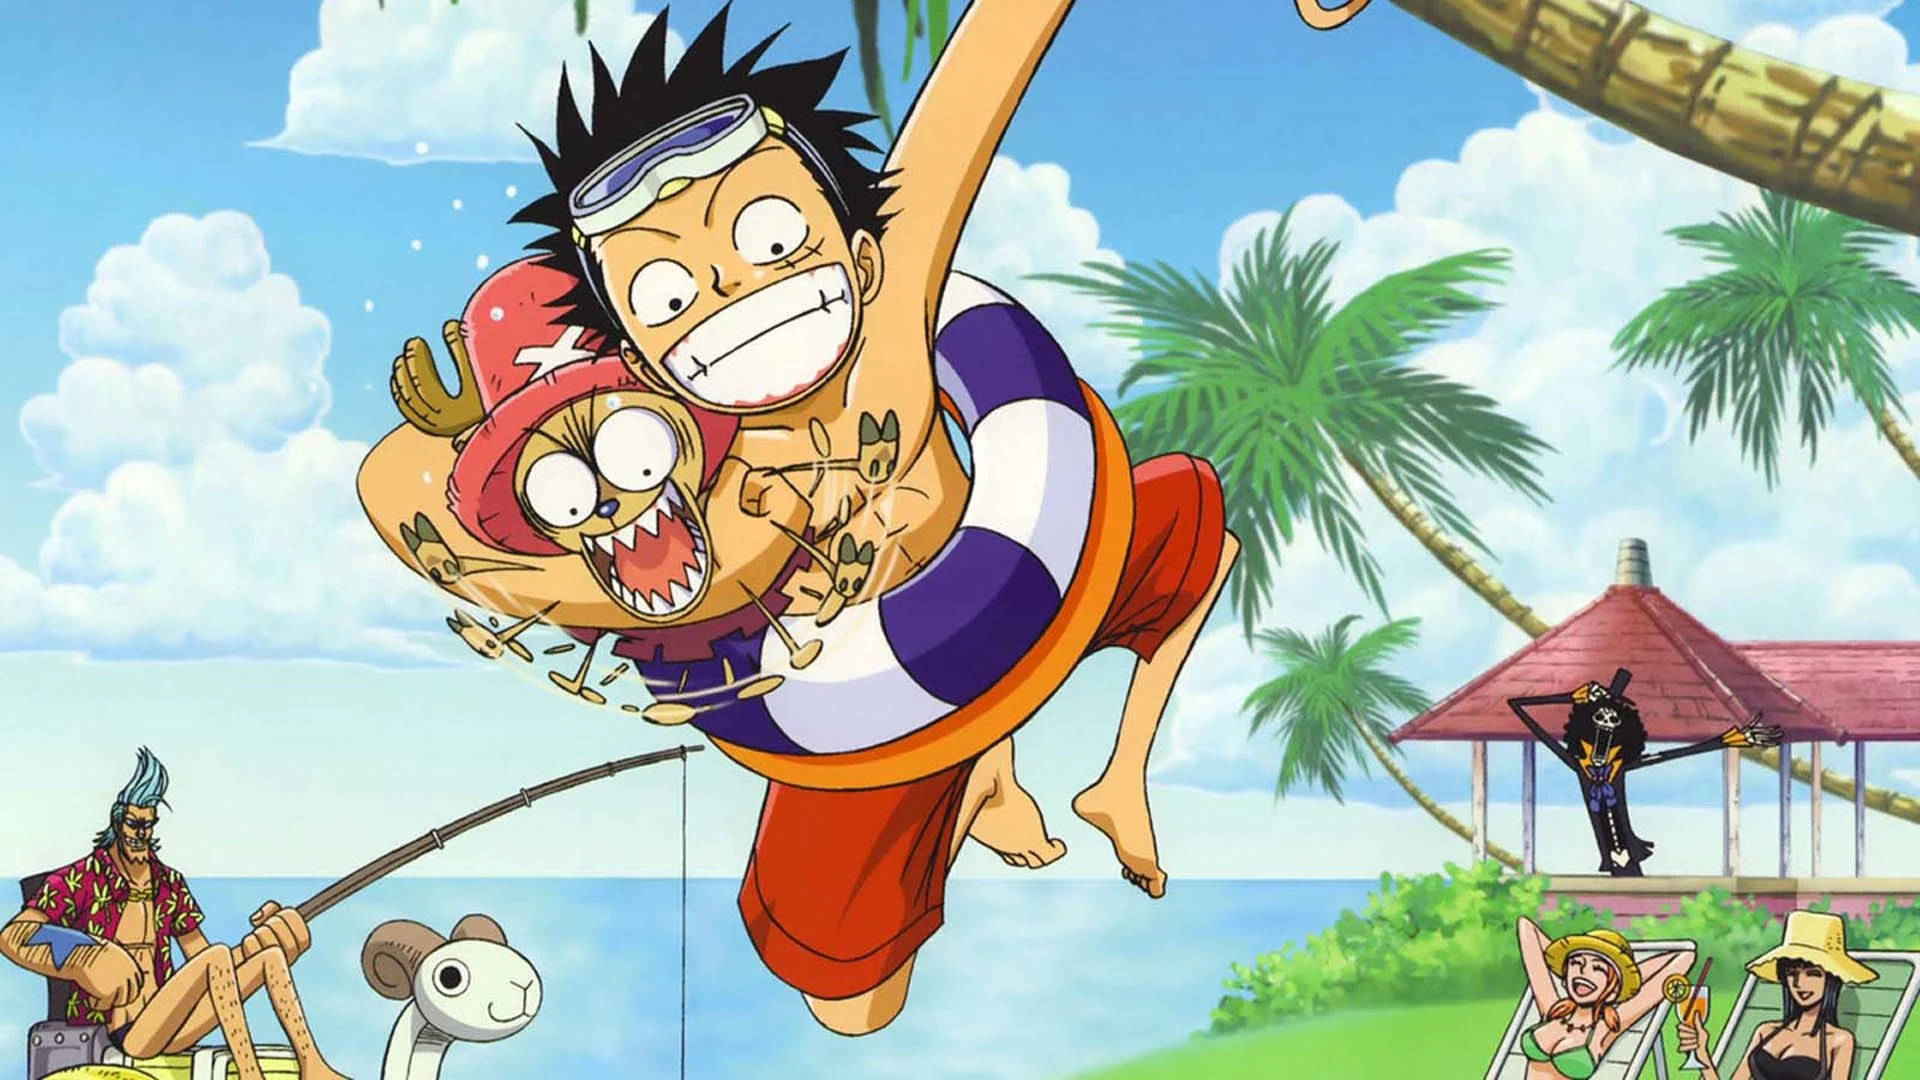 Funny Anime One Piece Pirate Crew Wallpaper